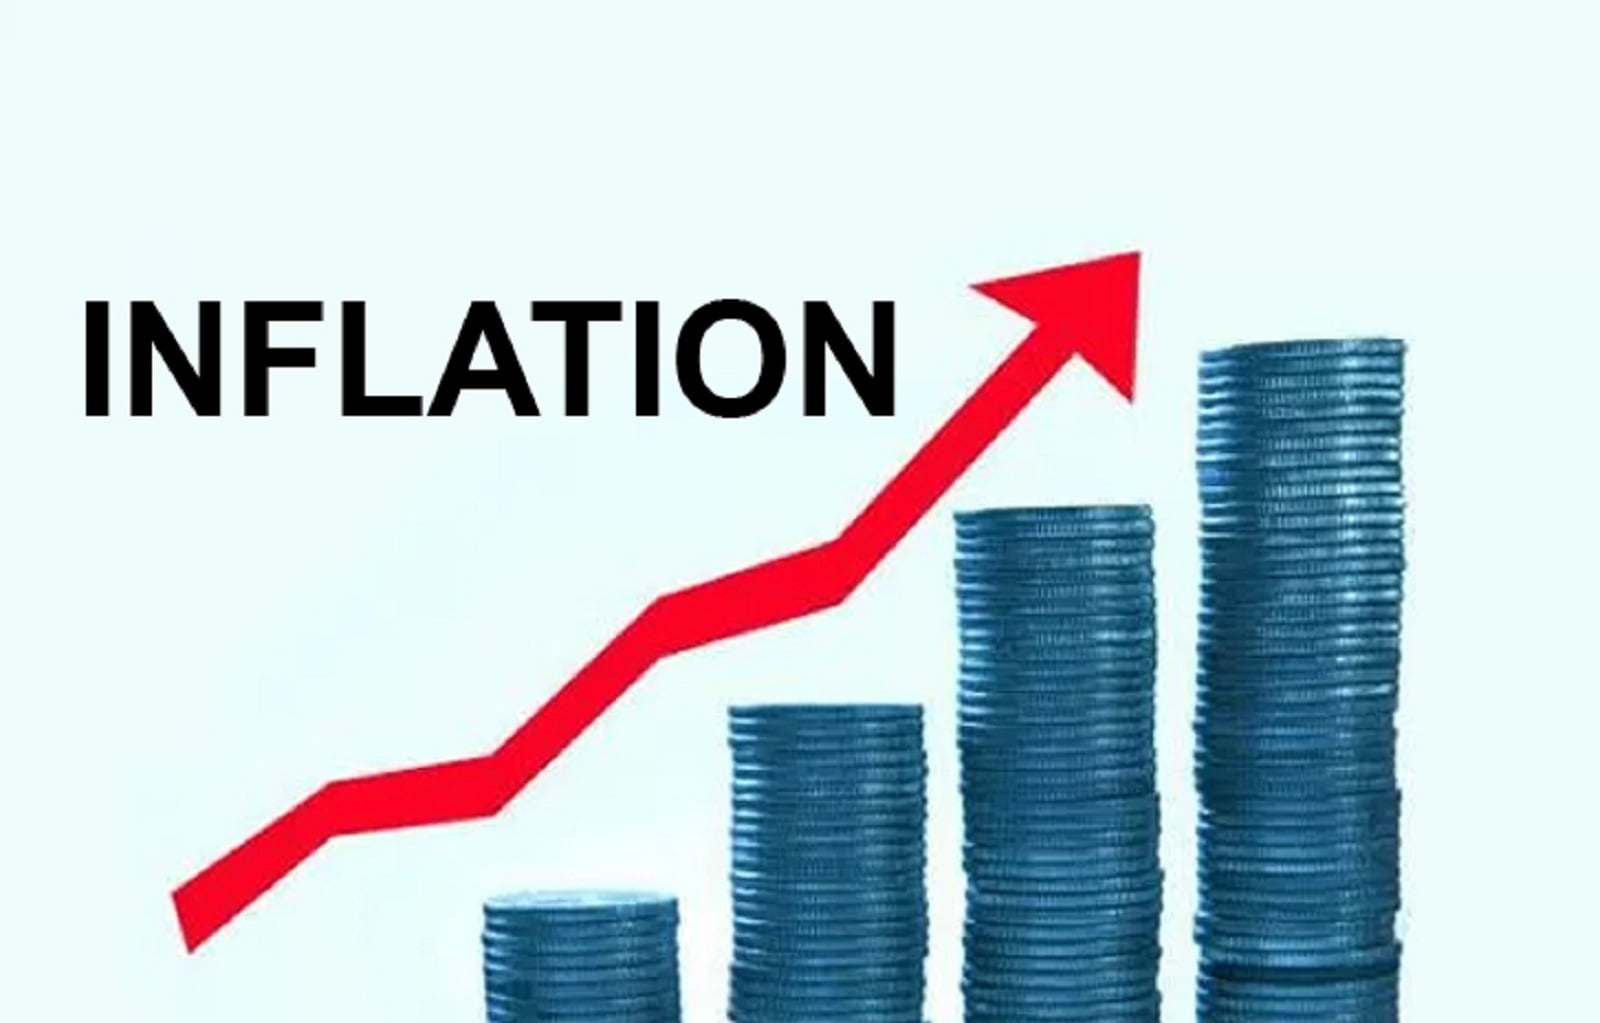 CBN Is Reluctant – Experts Express Worries As Nigeria’s Inflation Rate Surges